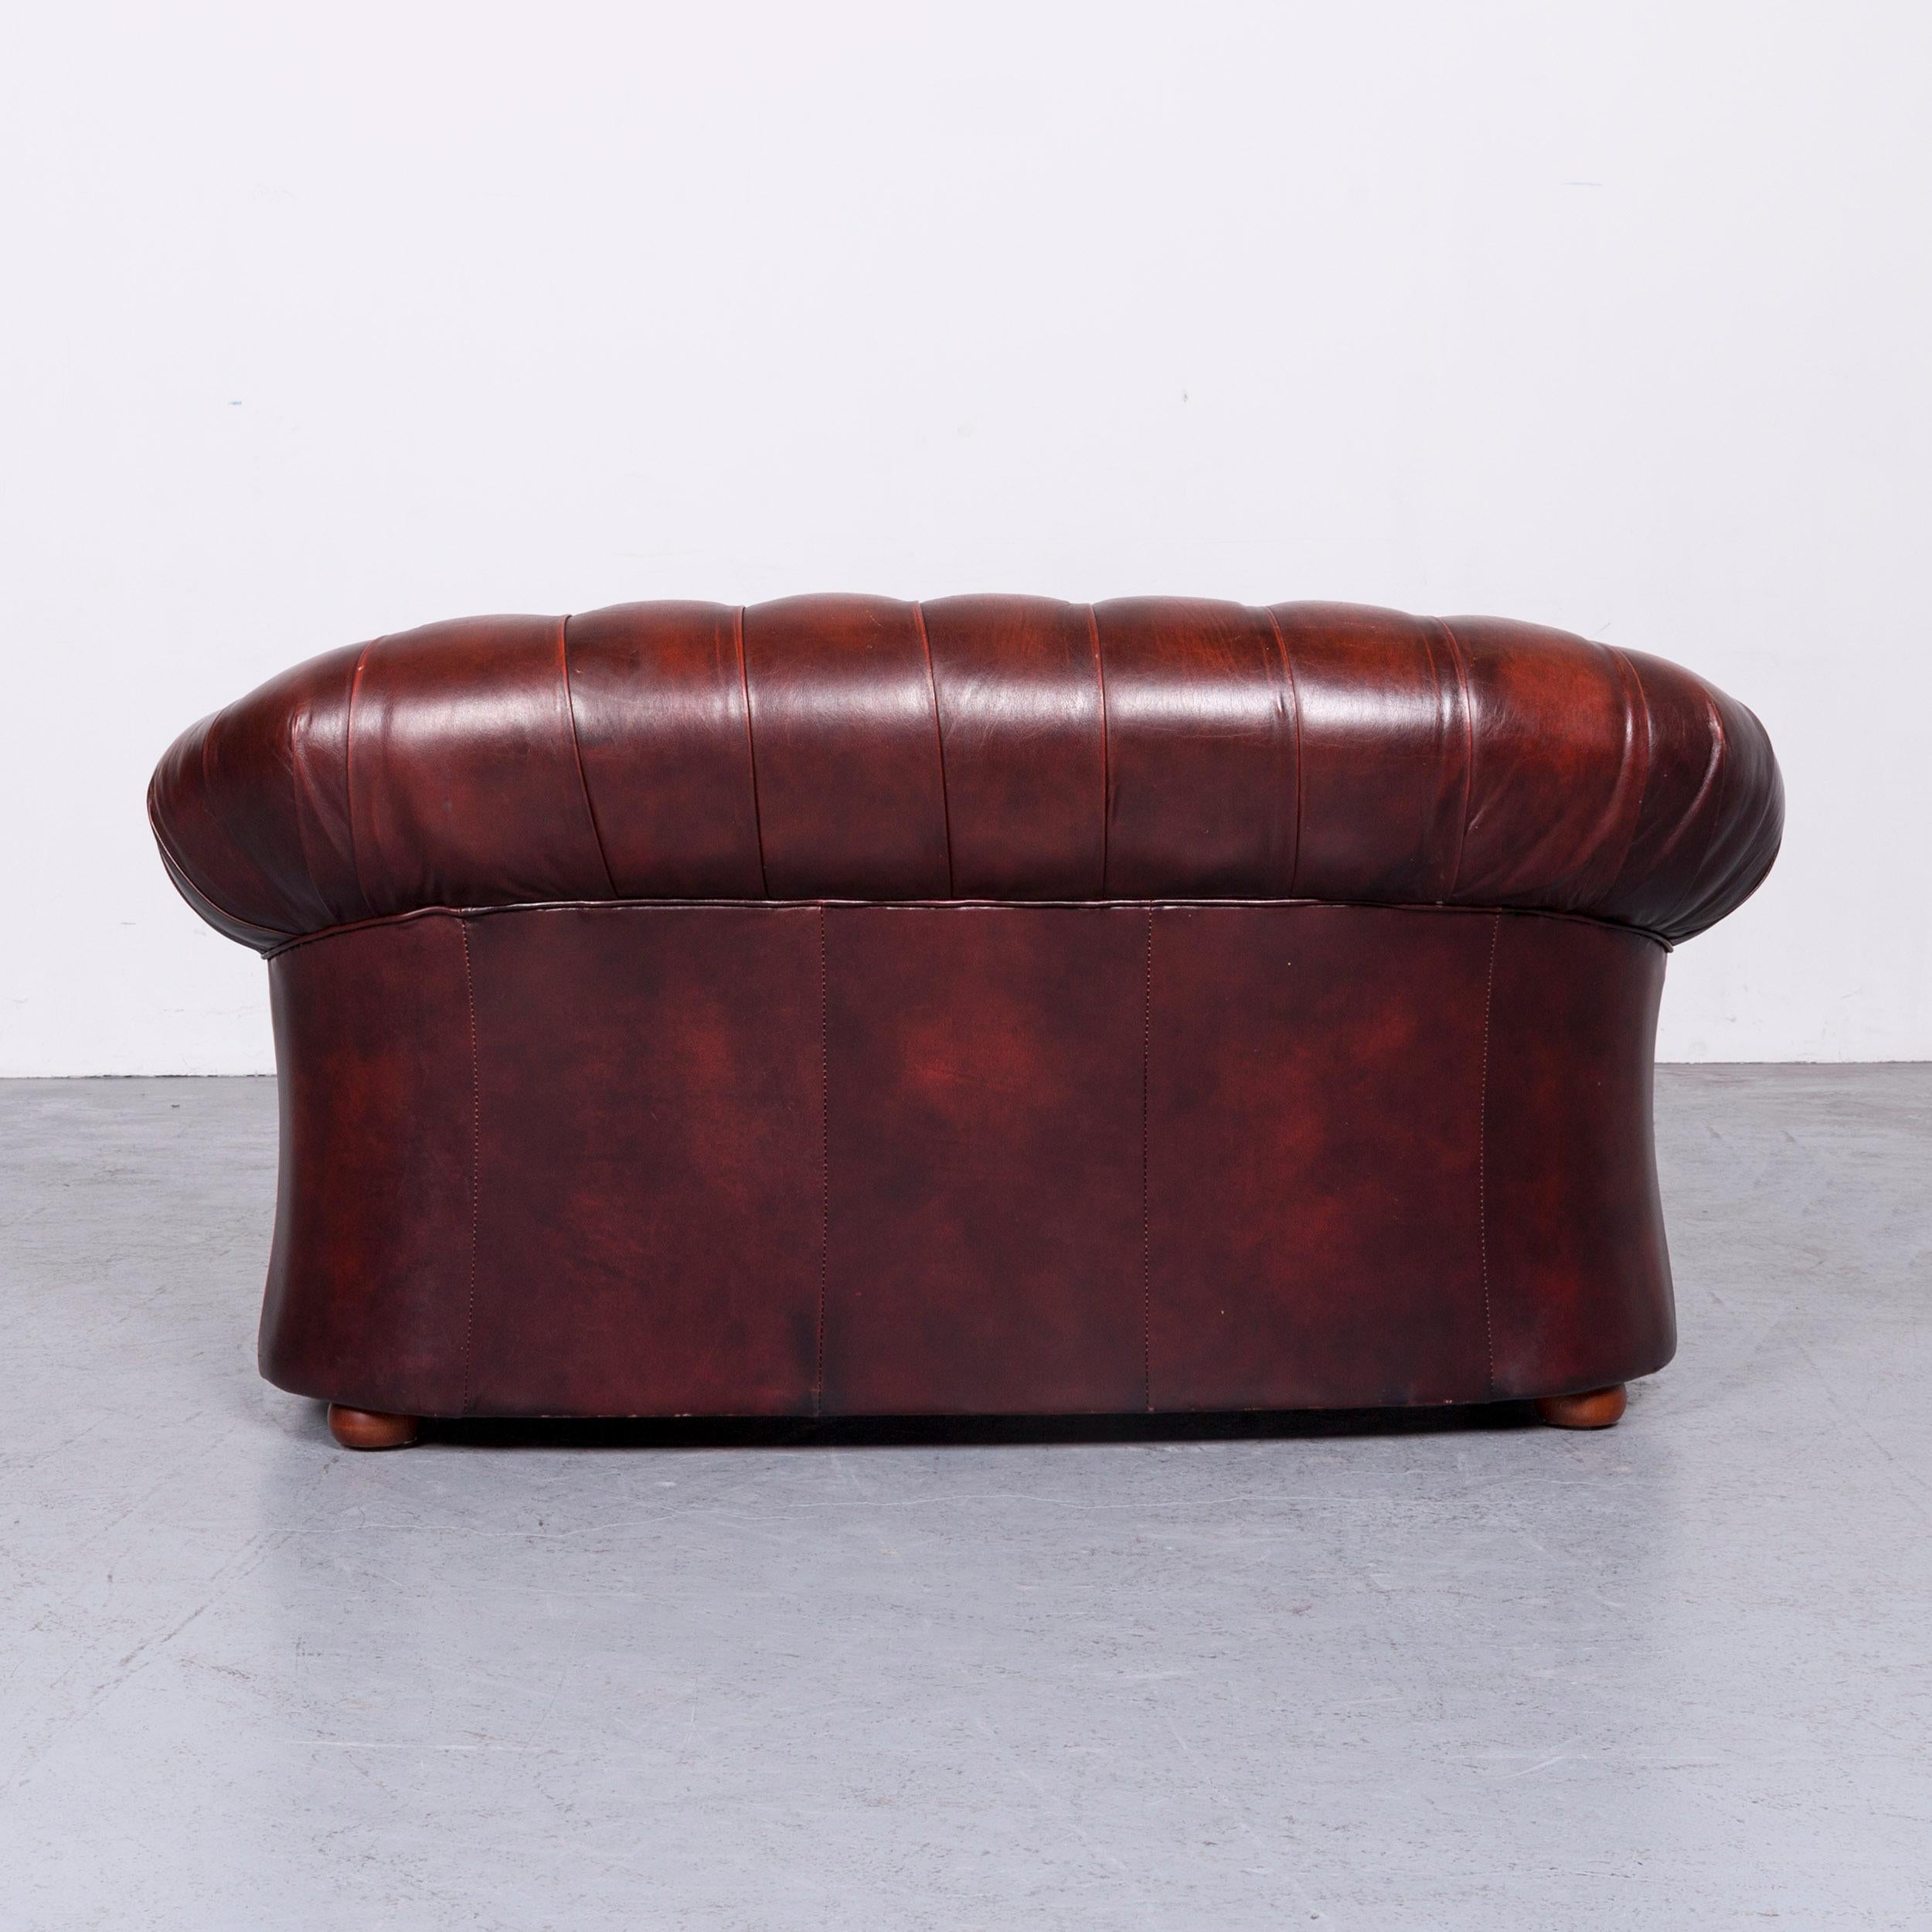 Chesterfield Centurion Leather Sofa Red Two-Seat Vintage Couch 2